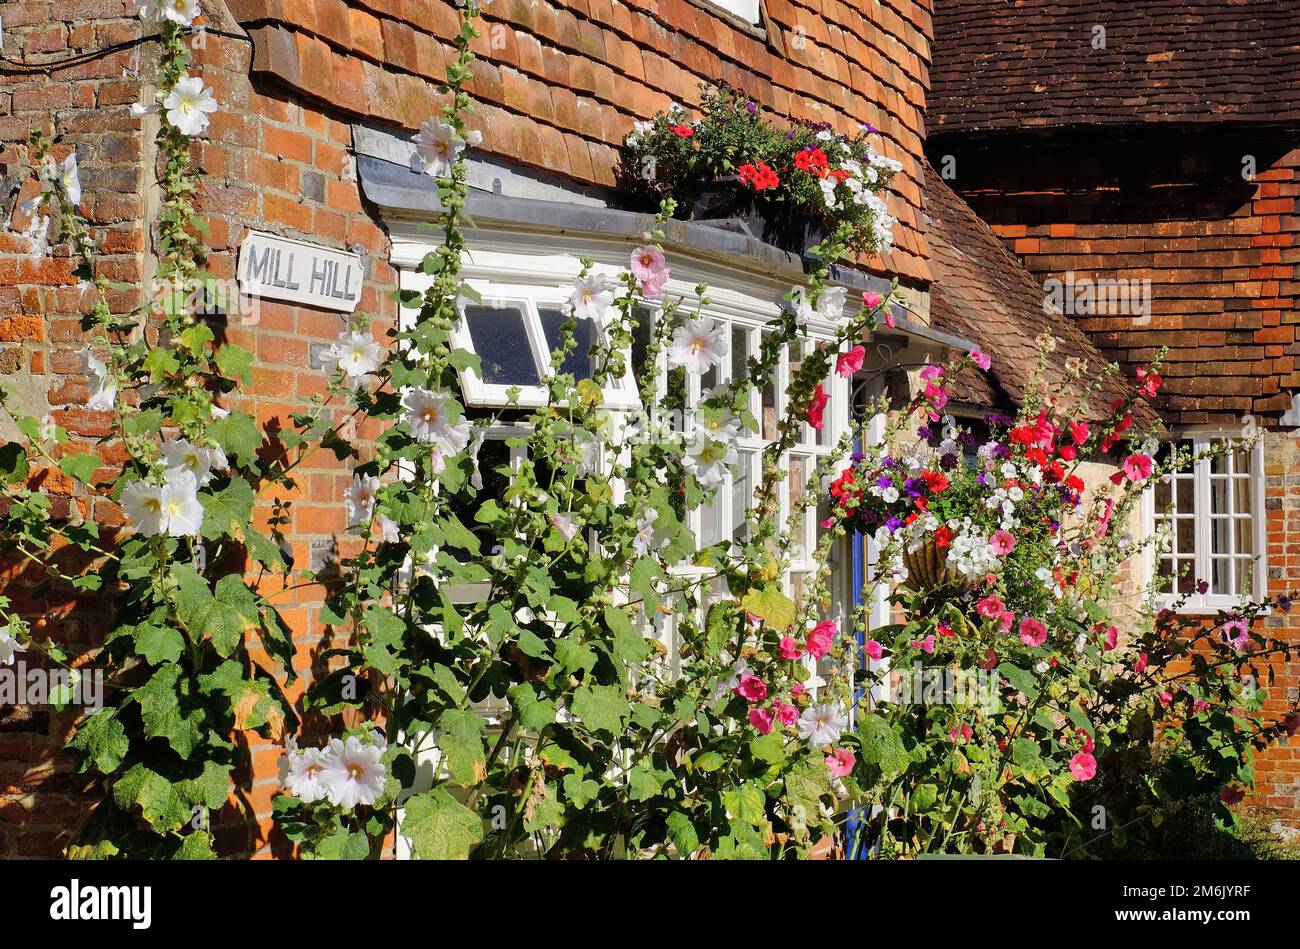 Alresford: Colourful hollyhocks (Alcea) blooming at a period brick house with shingles and bay window in New Alresford, Hampshire, England Stock Photo